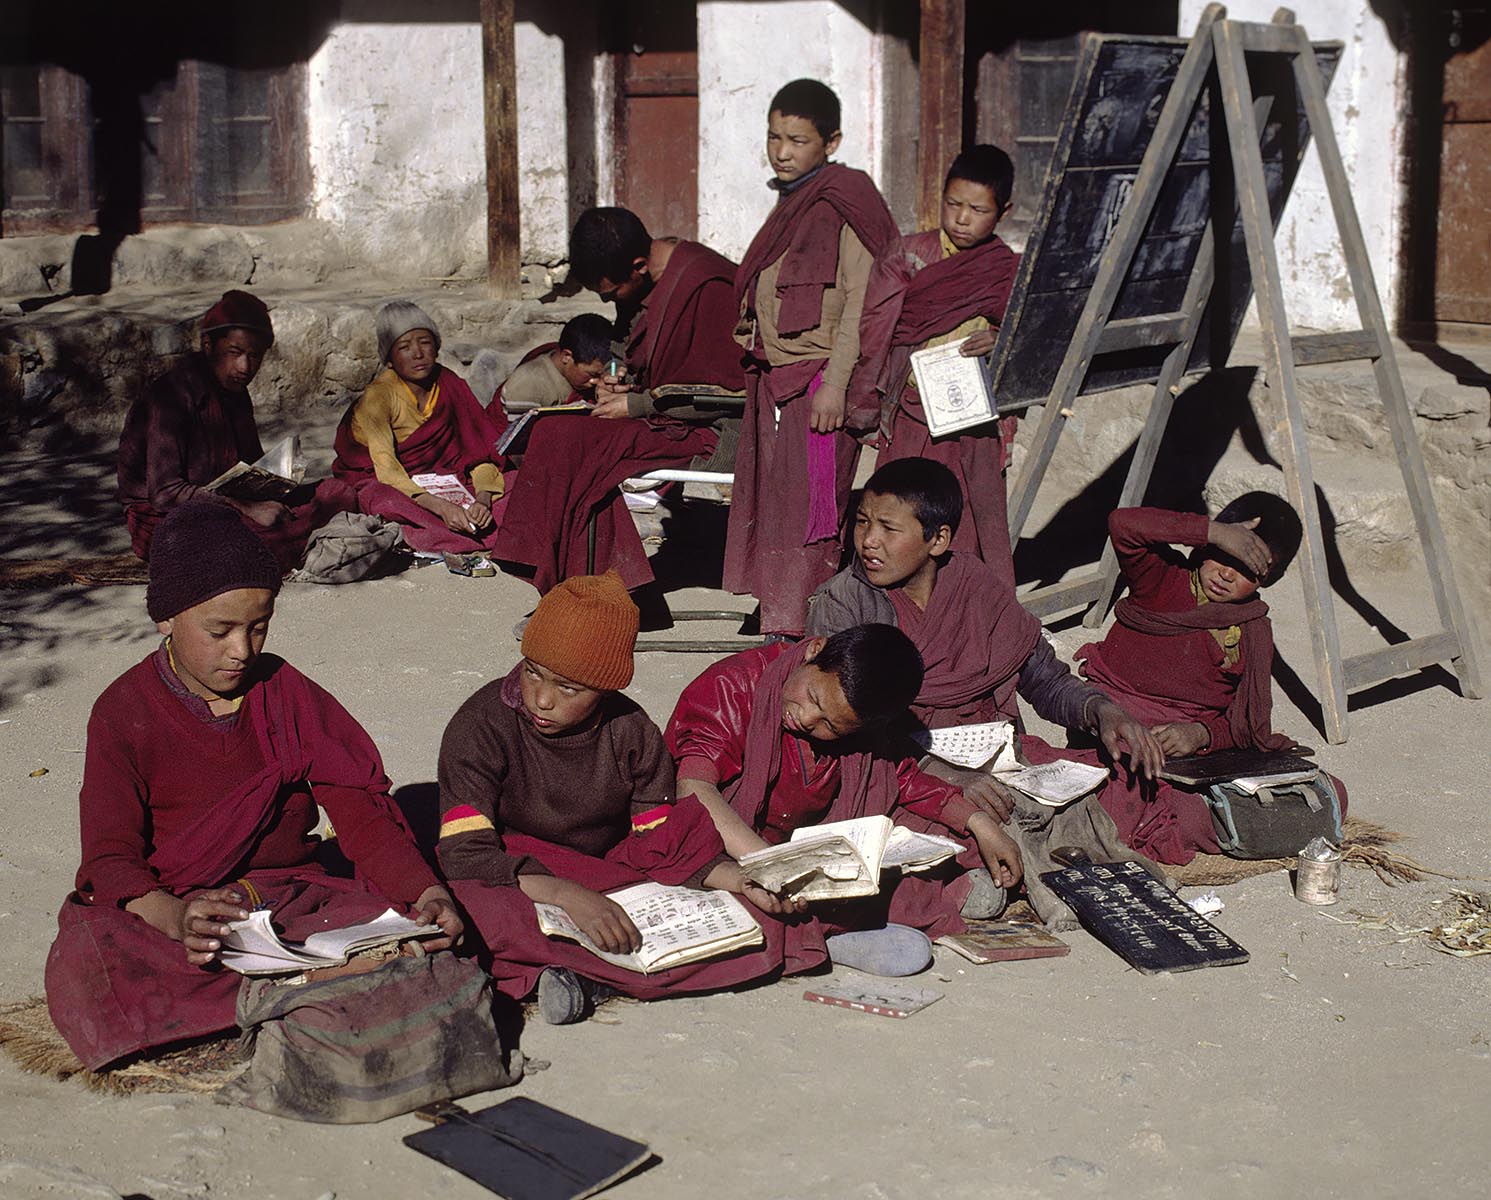 Young BUDDHIST MONKS study during class in the monastic SCHOOL at LEKIR GOMPA (monastery) - LADAKH, INDIA